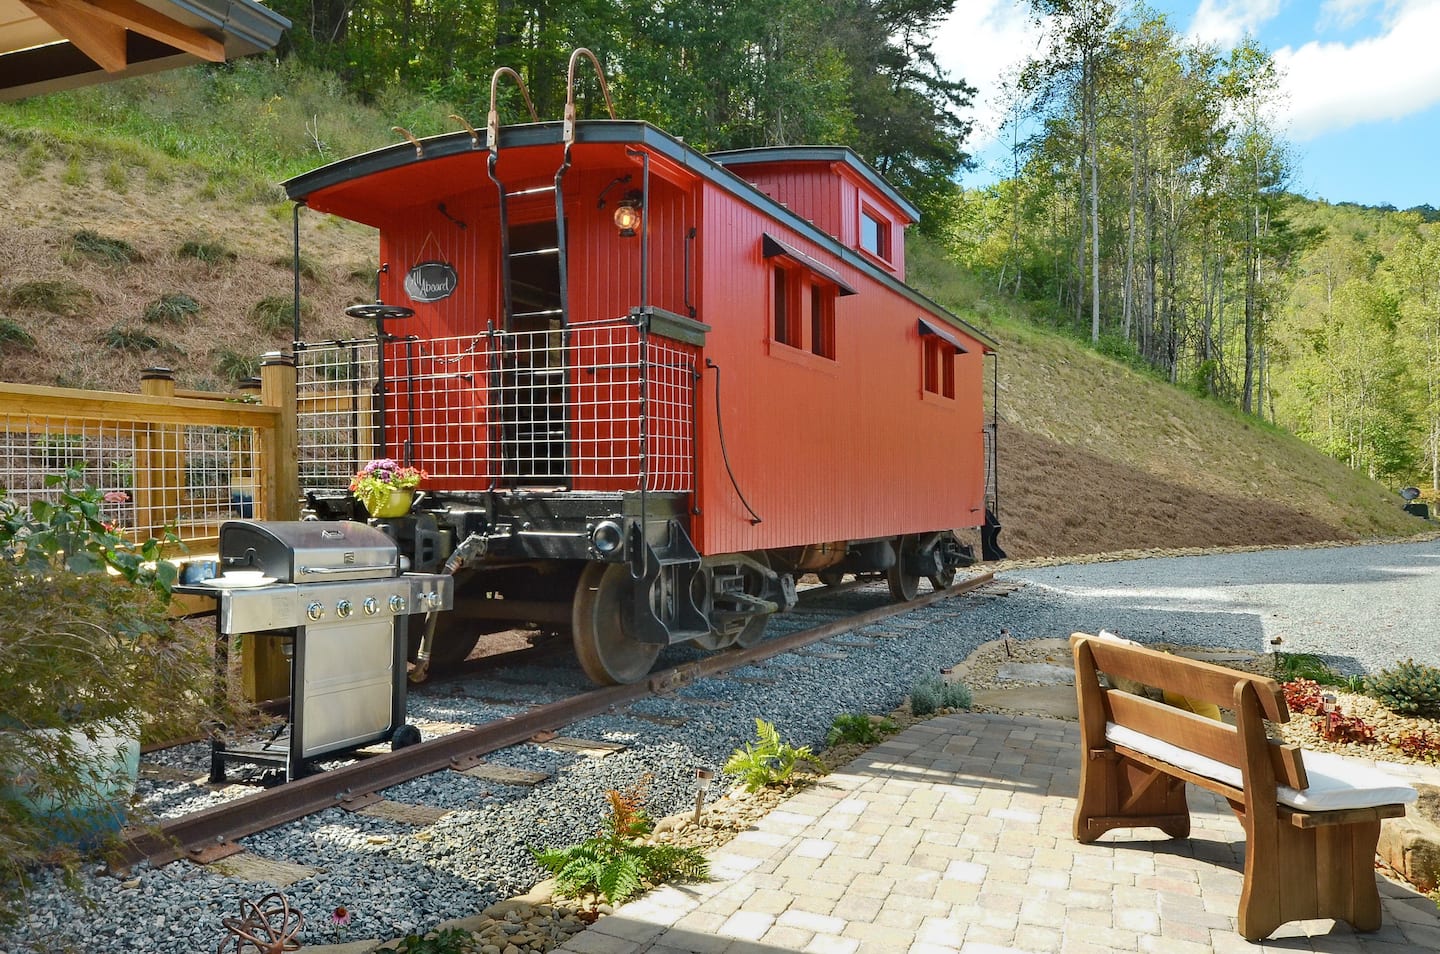 Stay inside a train caboose at one of the best Airbnbs in the United States